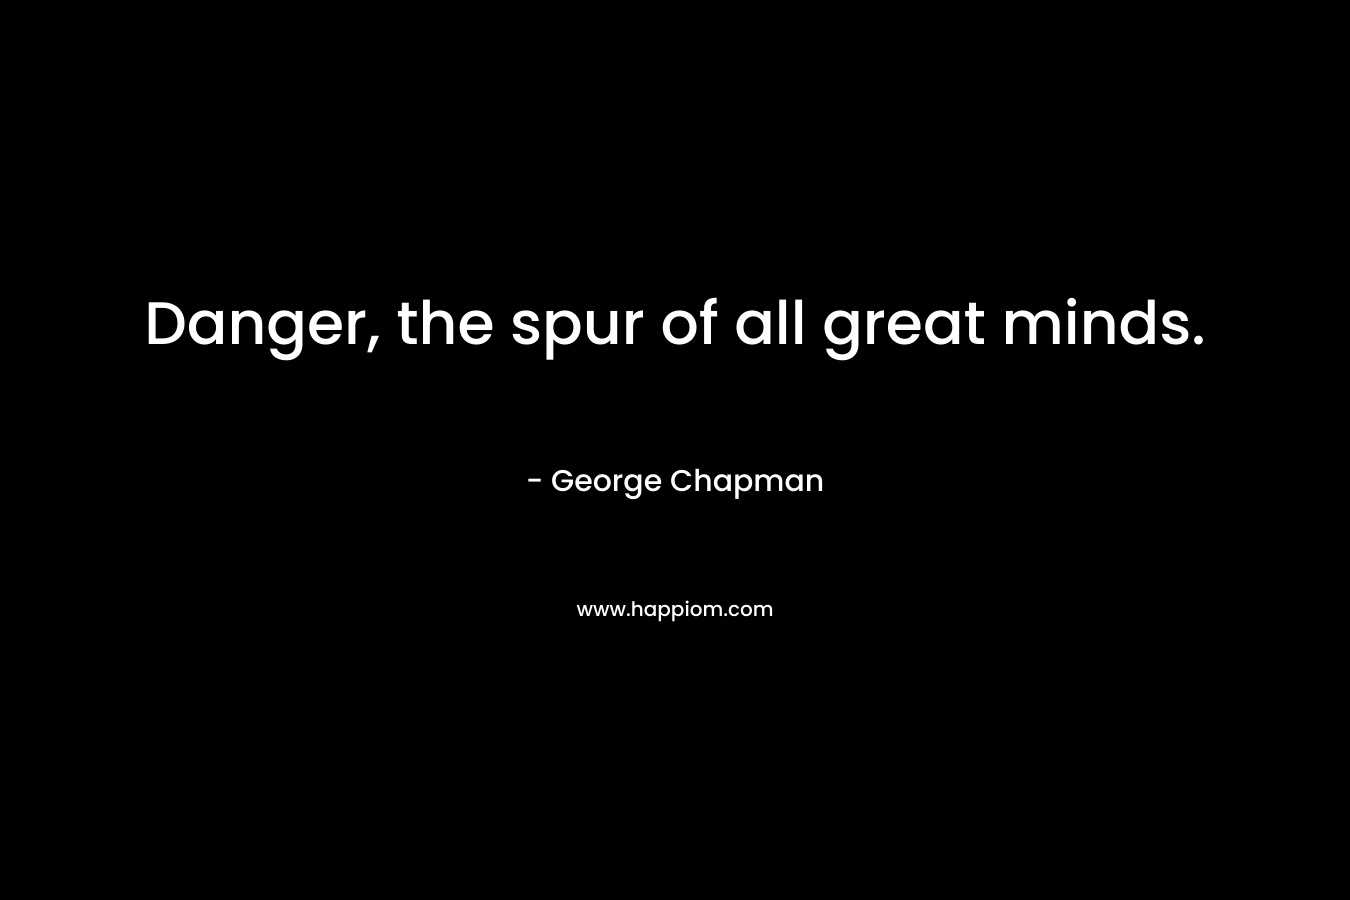 Danger, the spur of all great minds. – George Chapman